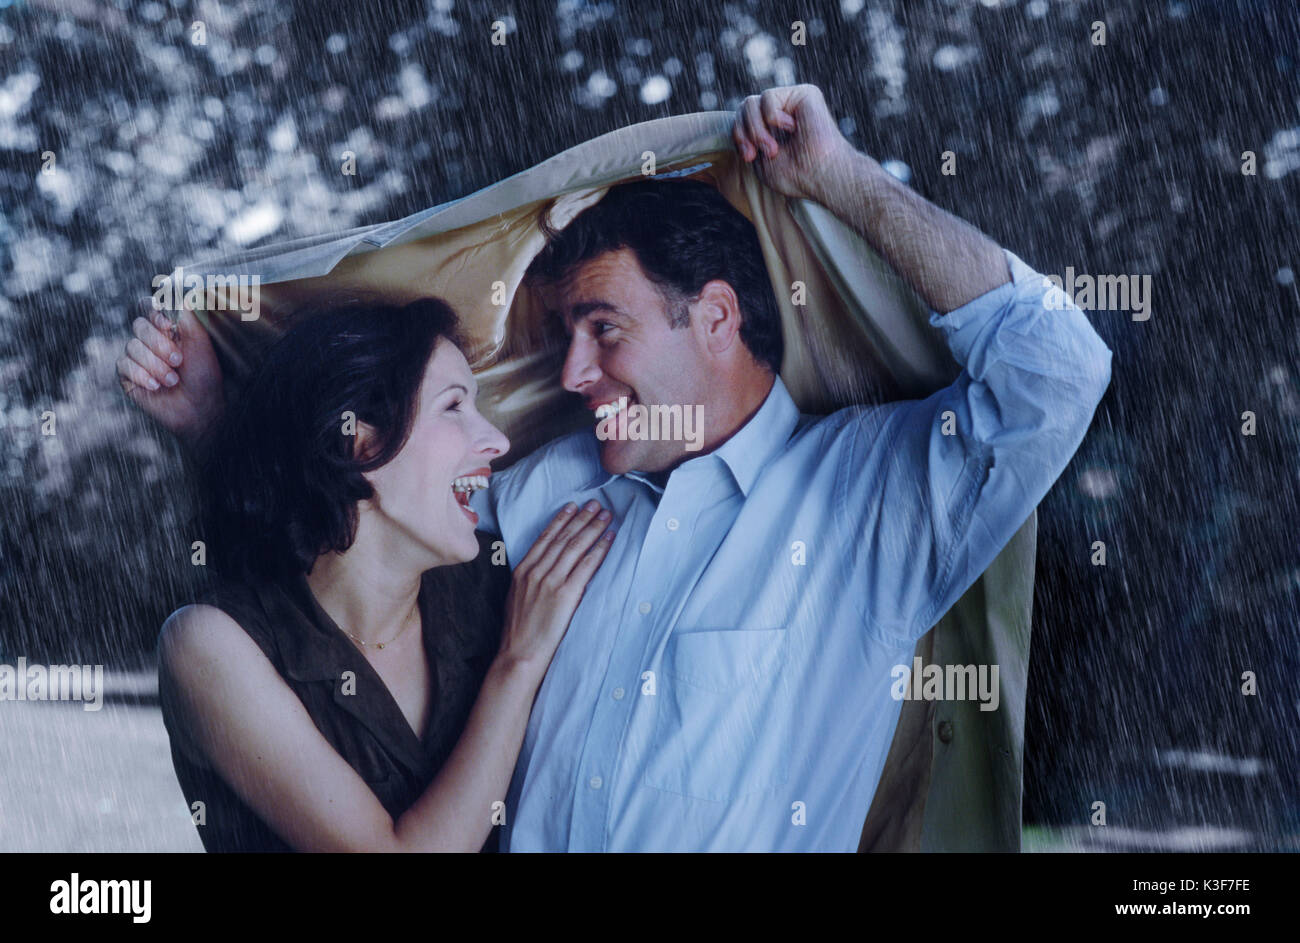 Couple protects himself with a jacket from rains Stock Photo